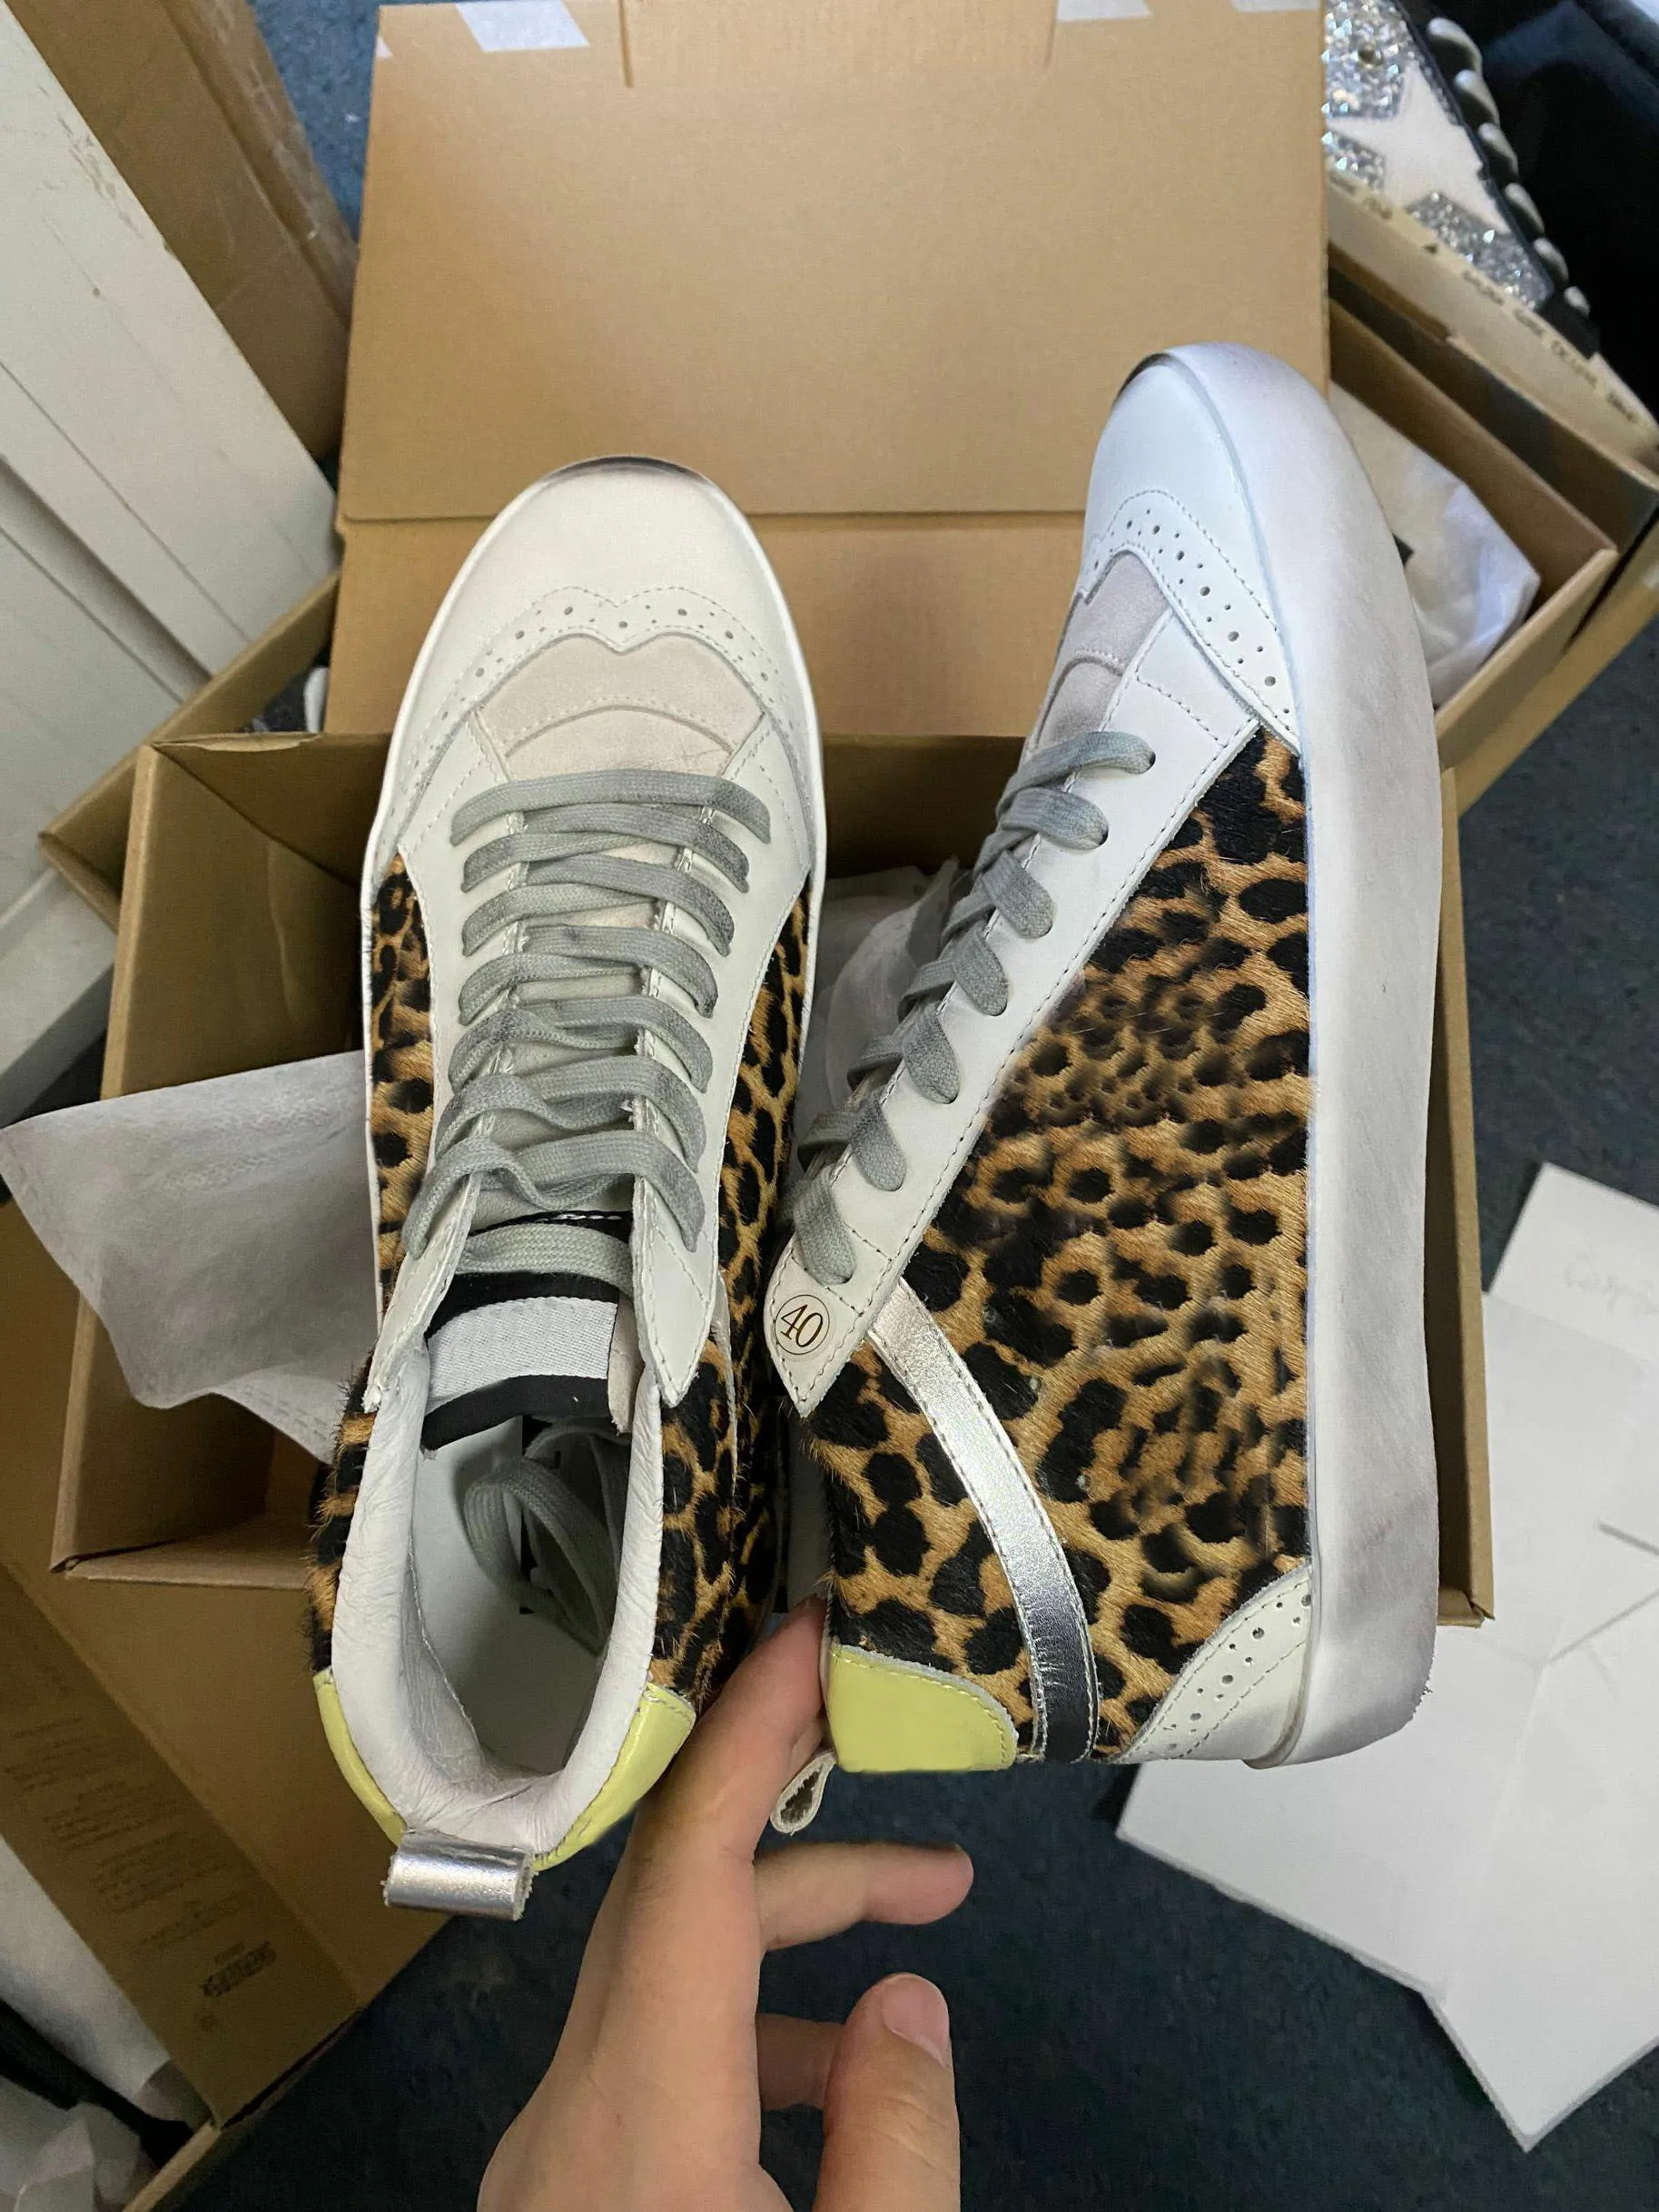 Golden Goode Sneakers Designer Chaussures Golden Mid Star Casual Casual Shoe Lace-Up Sneakers Italy Metallic Disted High Top Suede veau en cuir Snaker Goose's Women 676